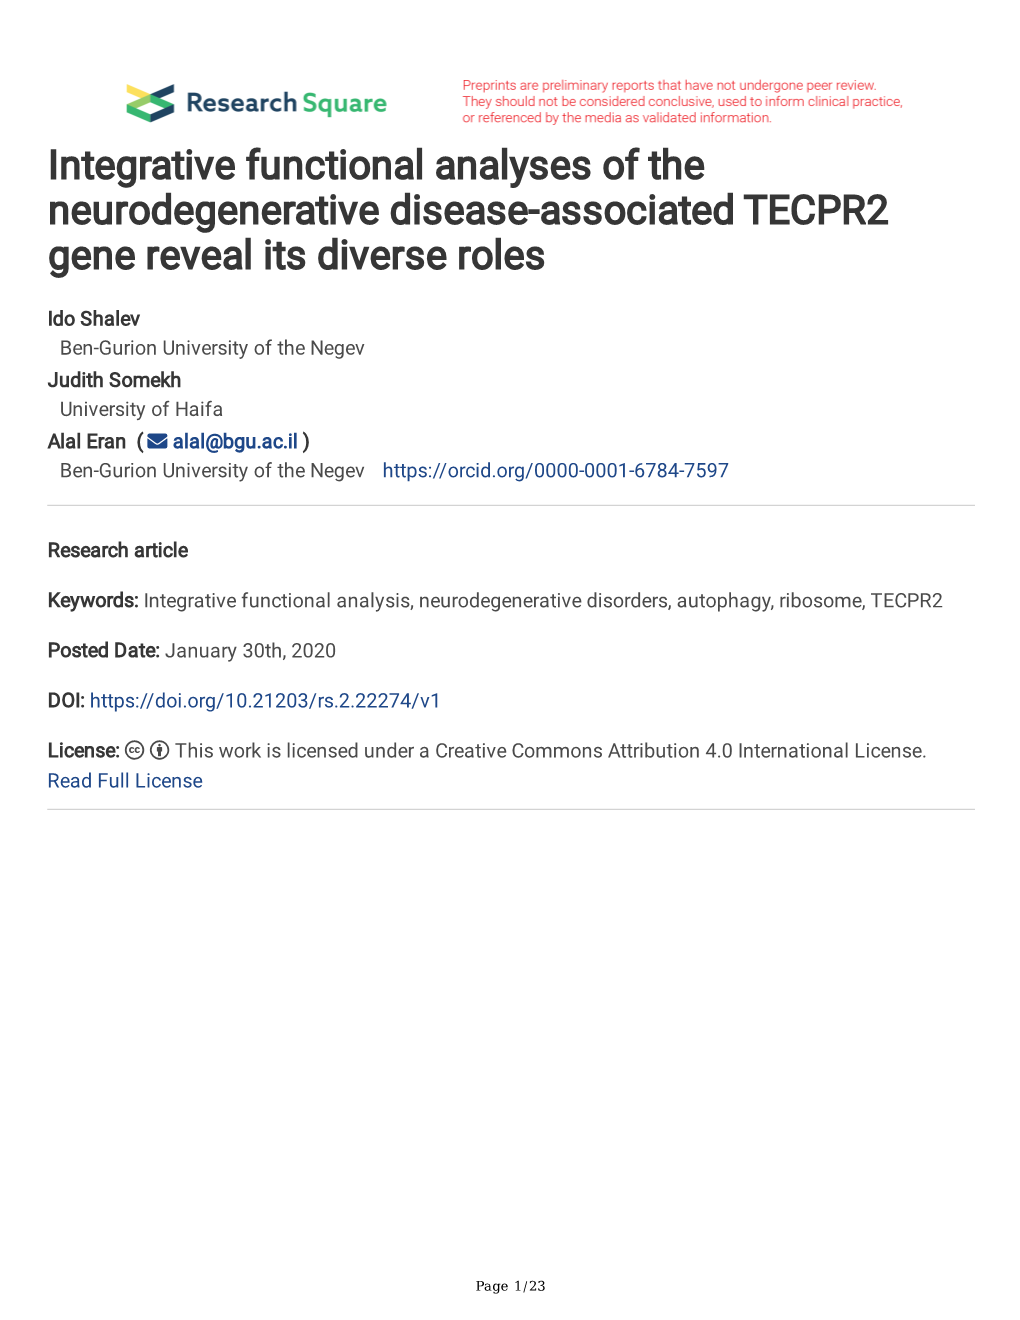 Integrative Functional Analyses of the Neurodegenerative Disease-Associated TECPR2 Gene Reveal Its Diverse Roles